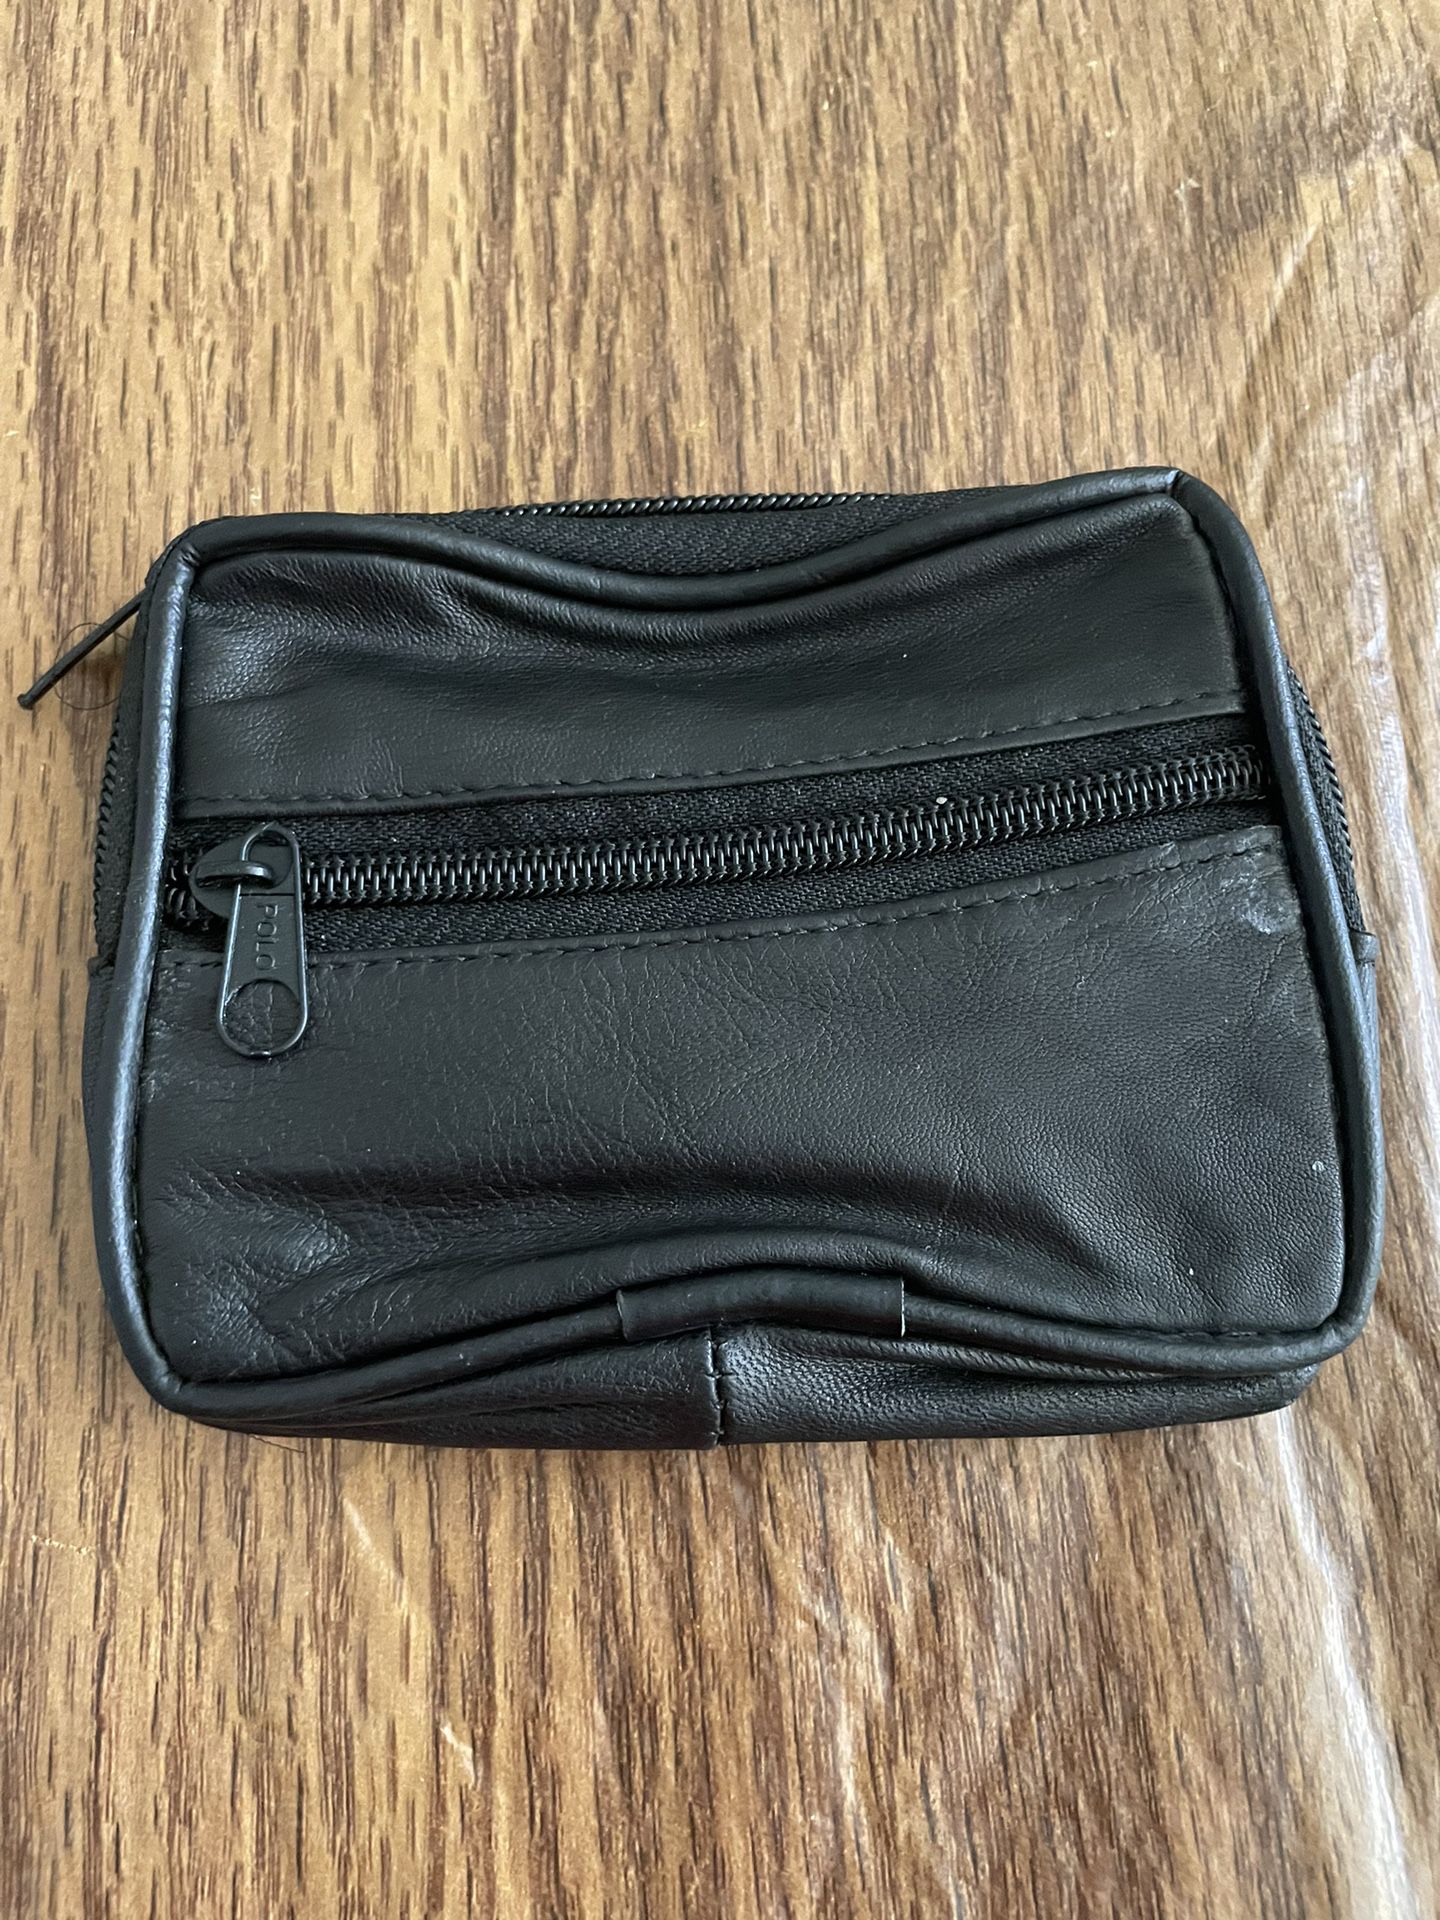 NIB - black leather wallet with 3 zippers and attached key ring inside 